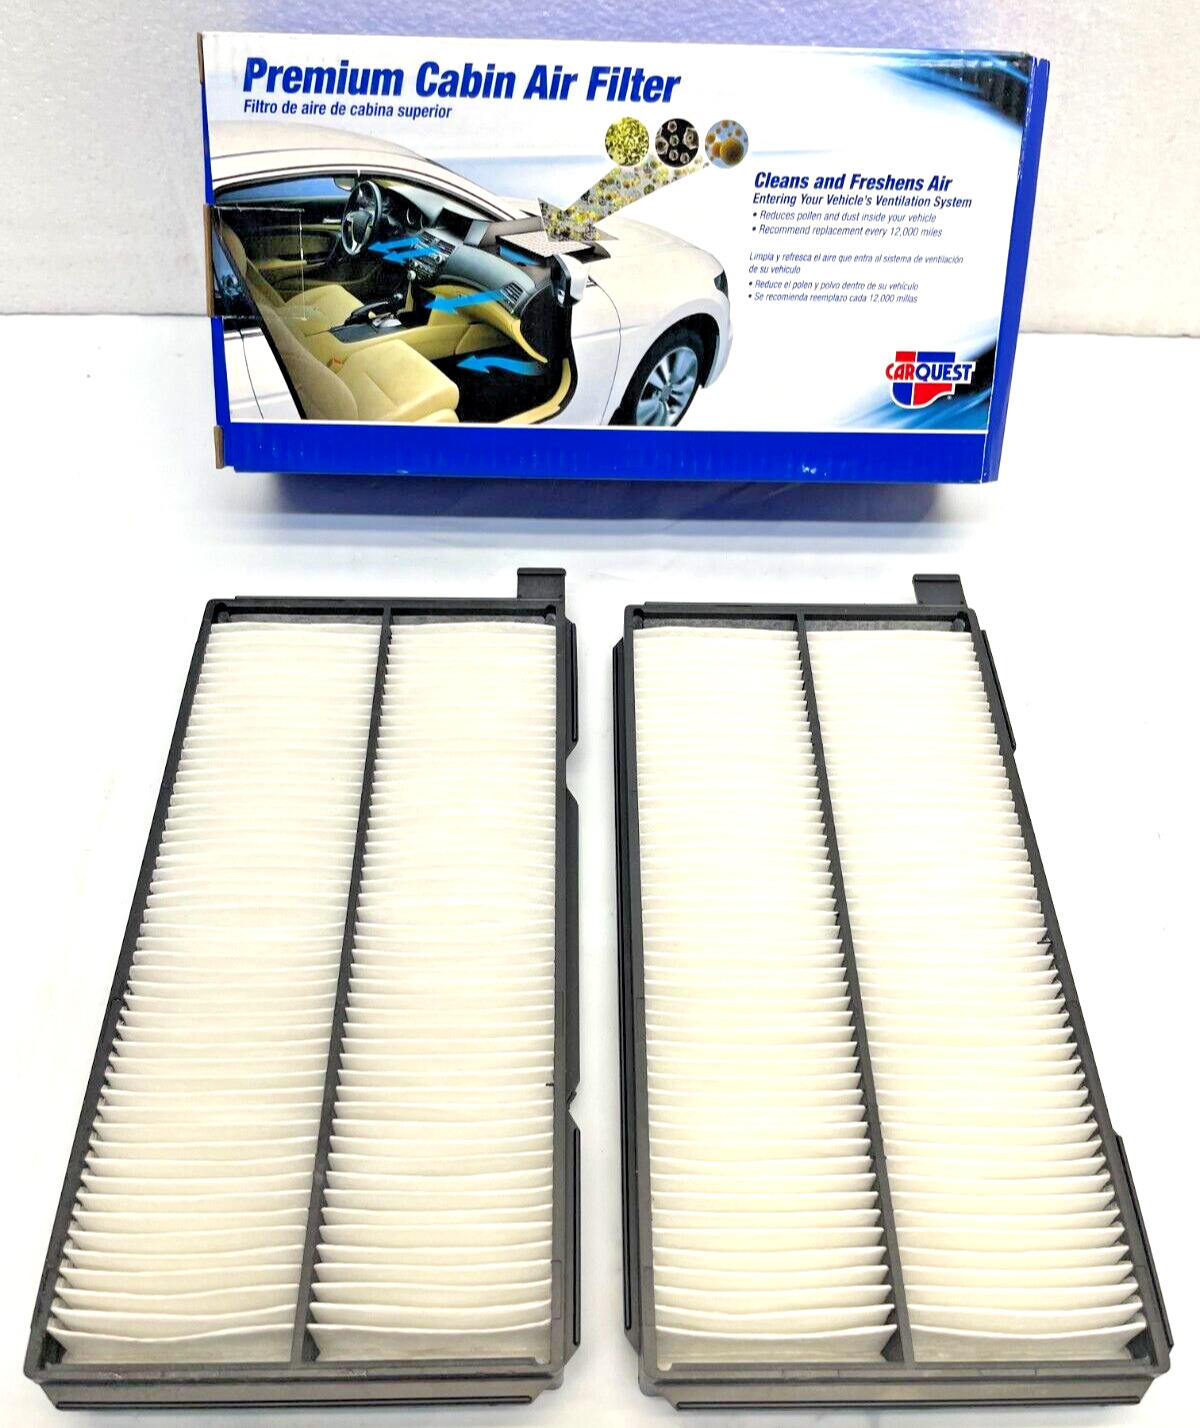 CARQUEST Cabin Air Filters (2 pack kit as shown) for 1999-2004 Chevrolet Tracker